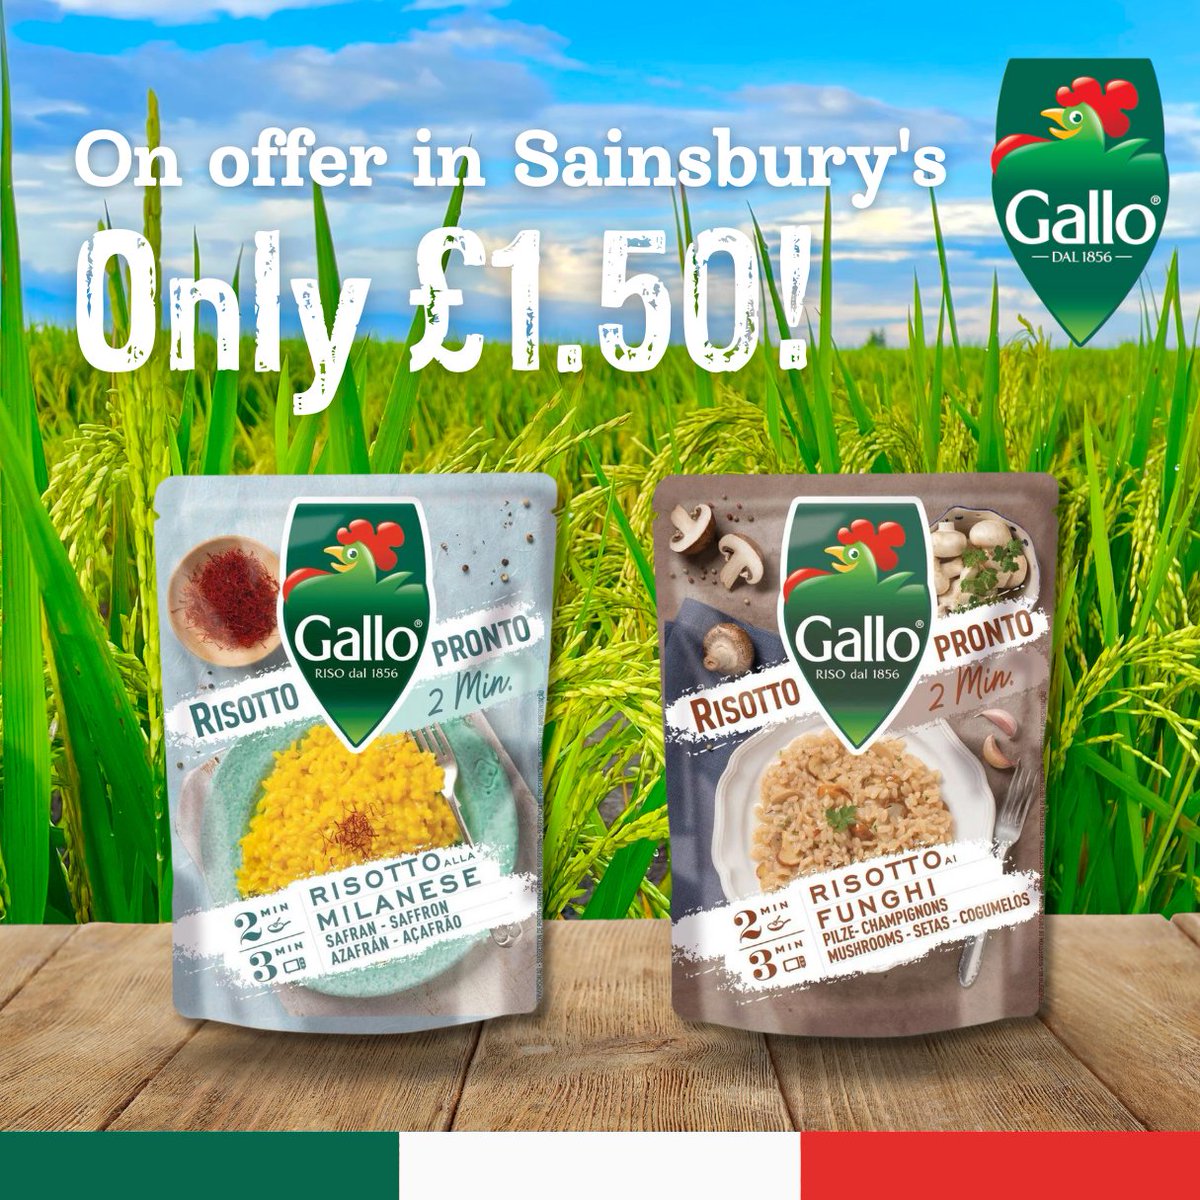 Don't miss Risotto Pronto on offer in @sainsburys for just £1.50! This quick and easy meal is perfect for those busy workdays or when you need a convenient dinner option. 😋 #supermarketoffer #supermarket #supermarketdeal #sainsburys #sainsburysoffer #RisoGallo